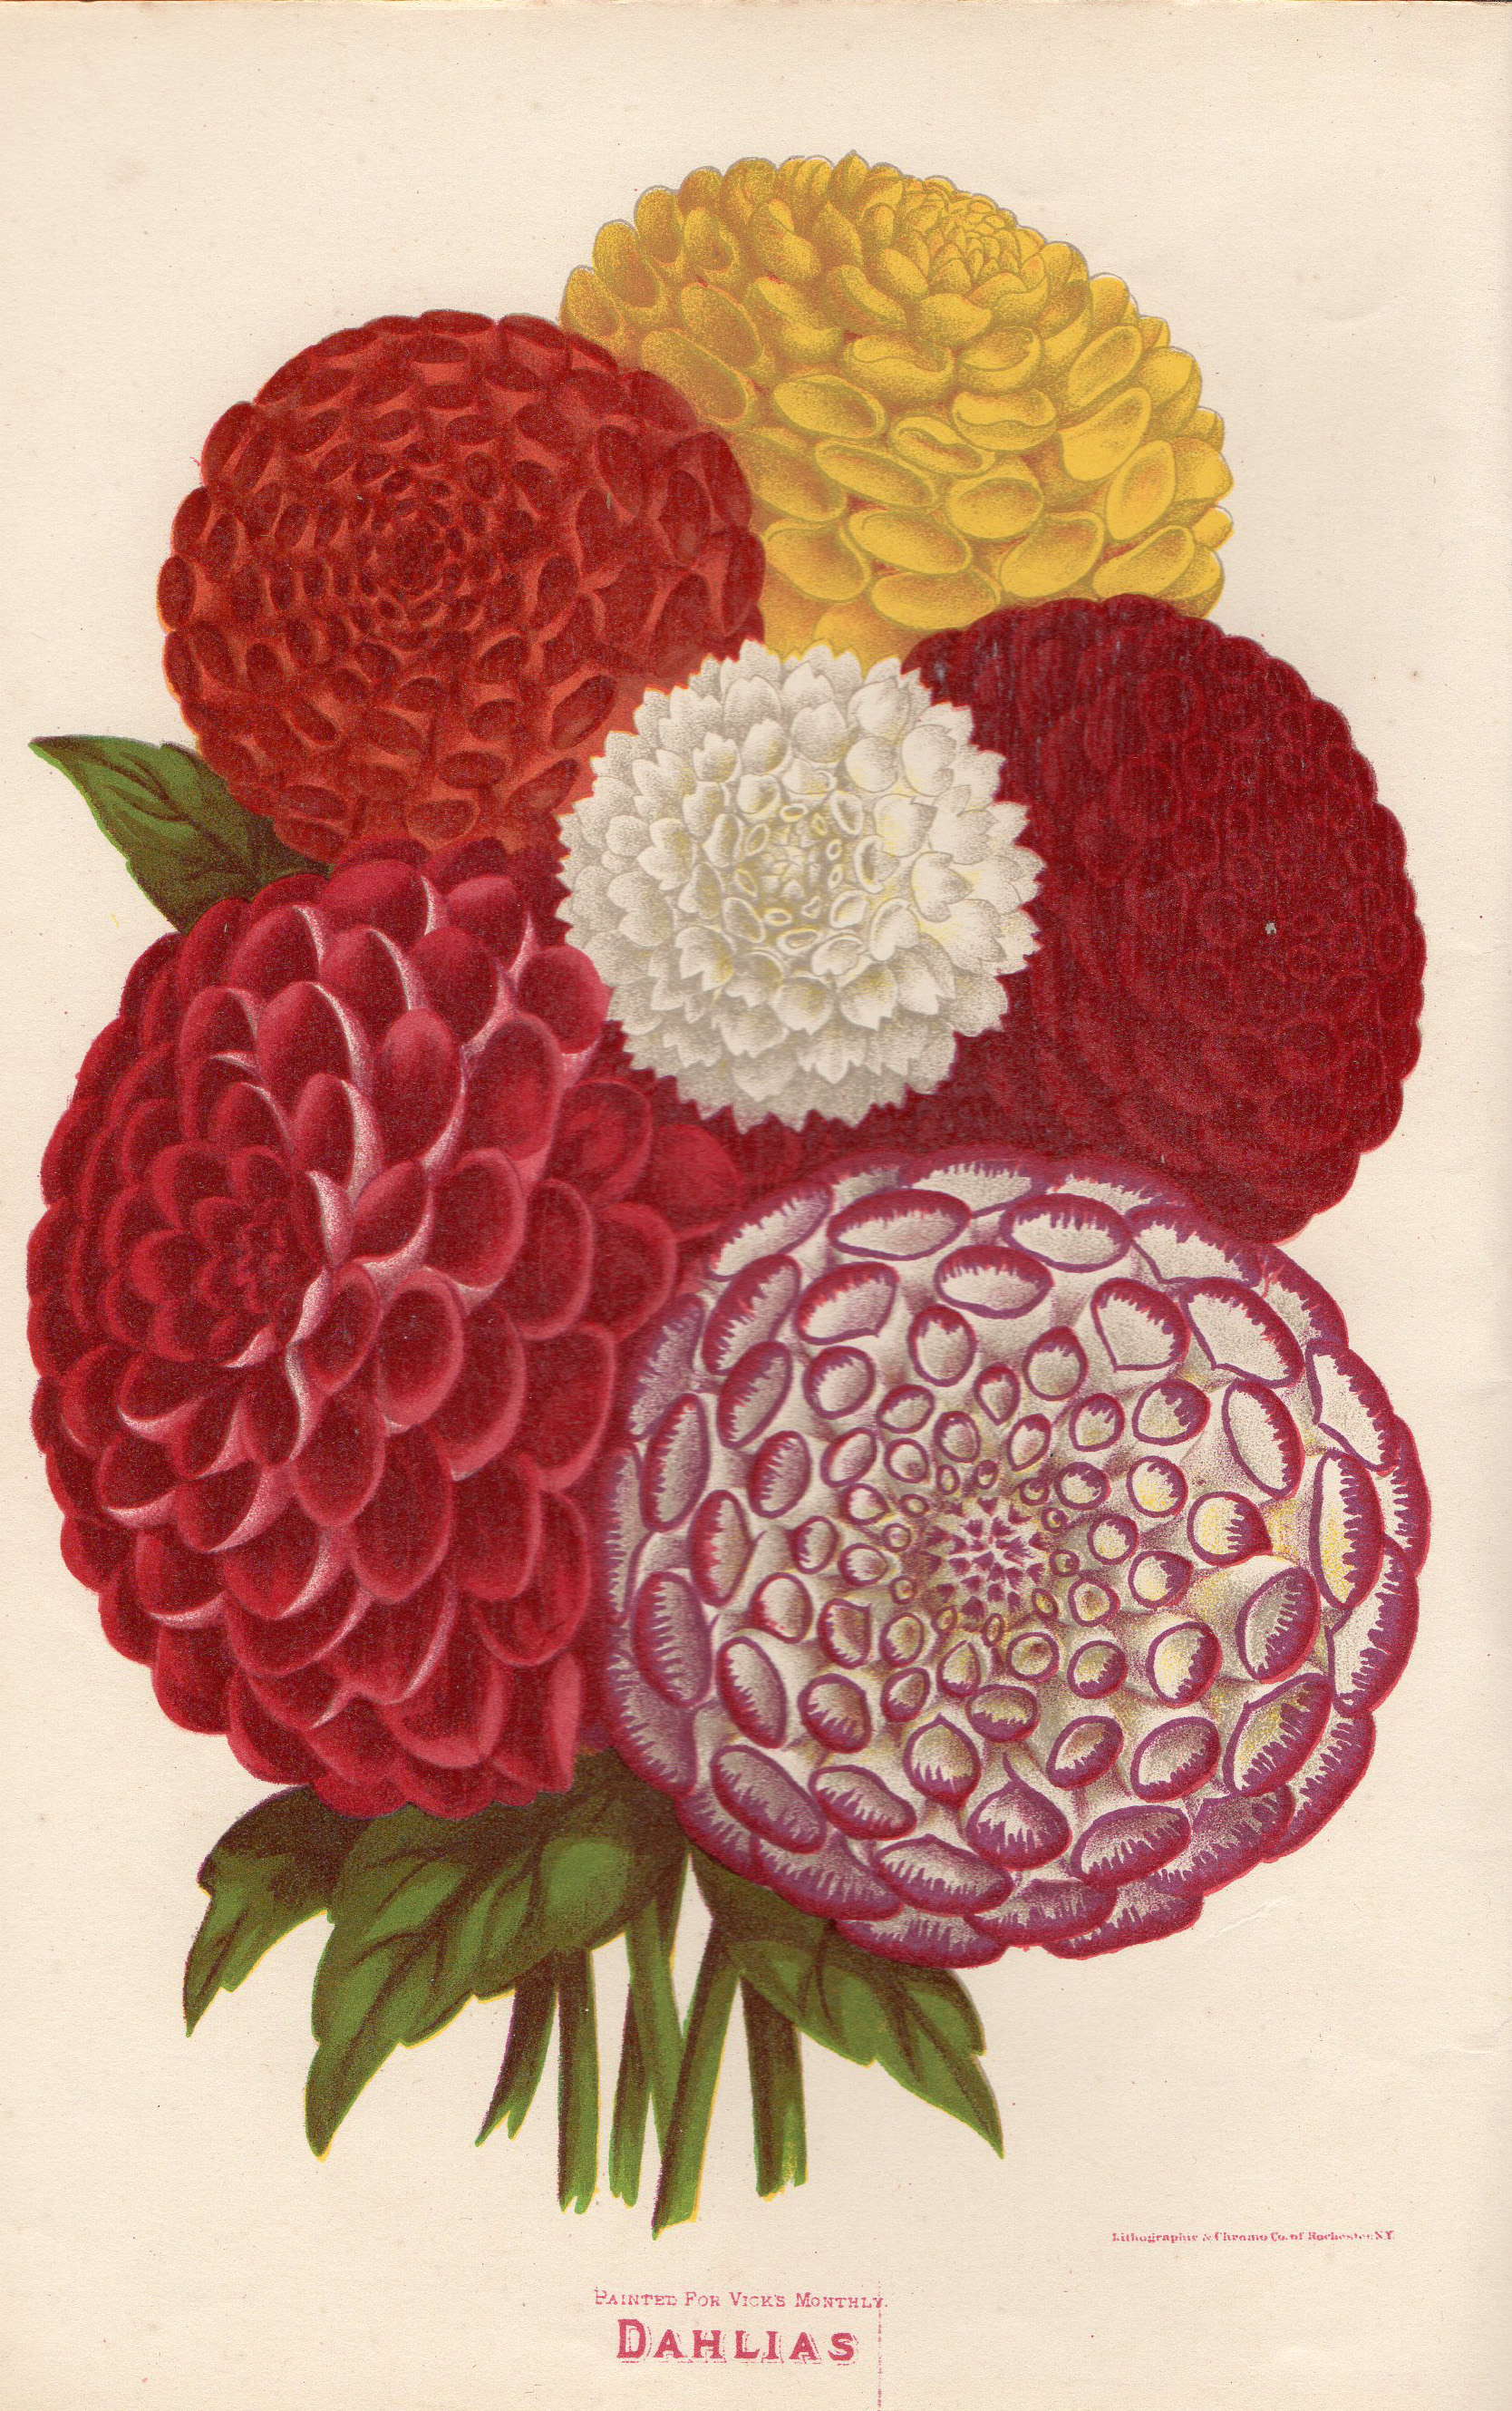 Chromolithograph from Vick's Illustrated Monthly, February 1878